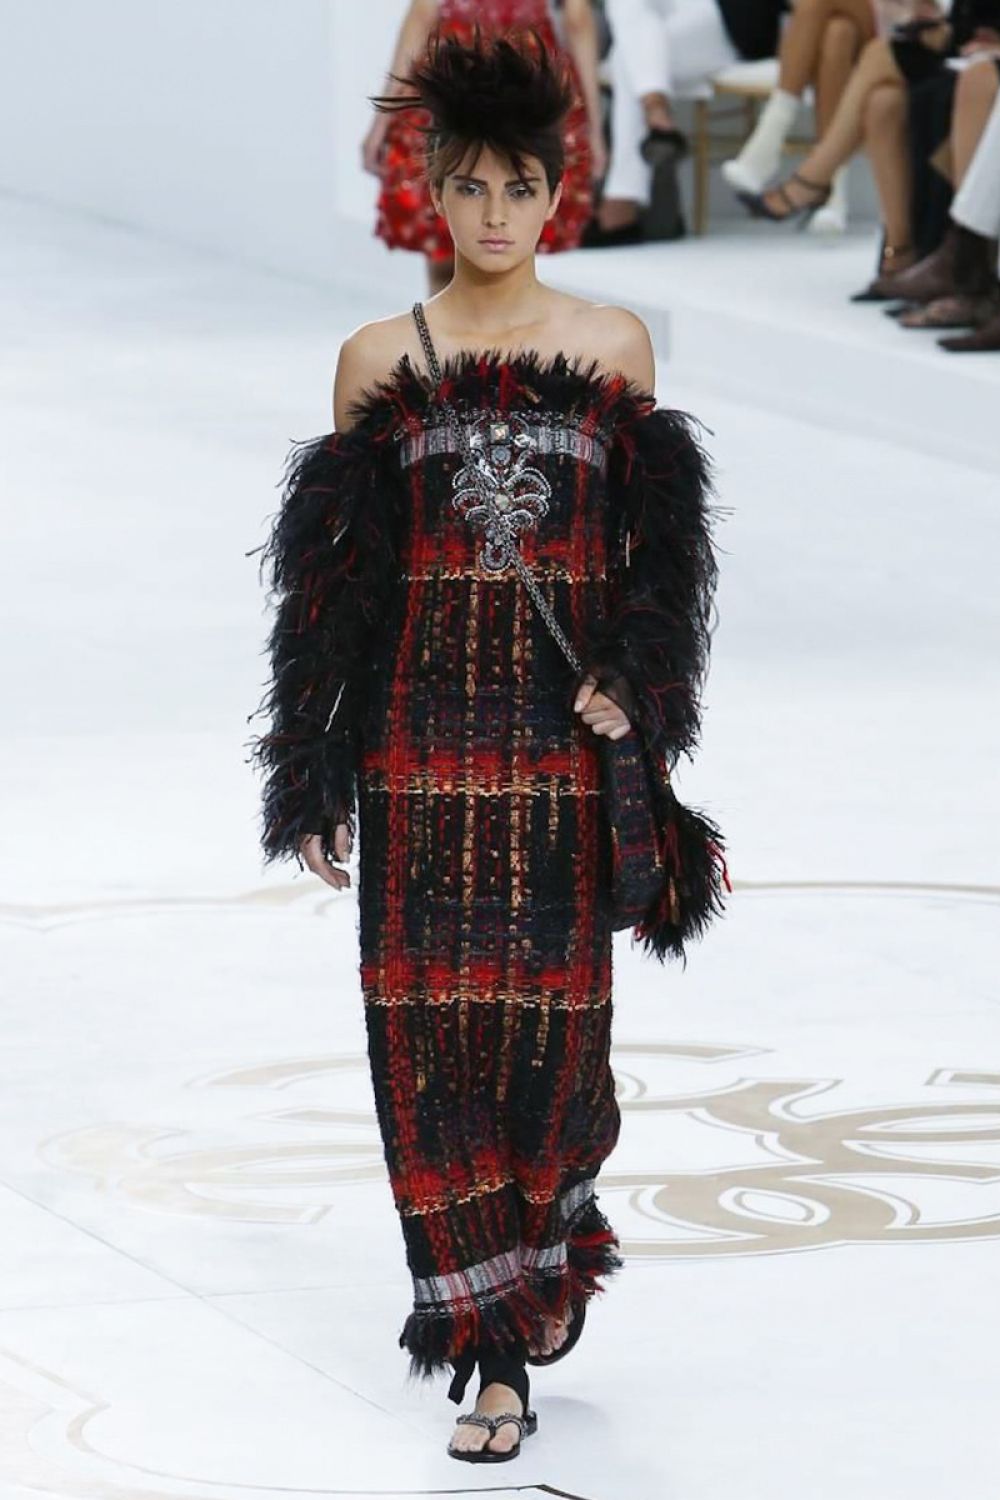 KENDALL JENNER at Chanel Haute Couture Runway in Paris – HawtCelebs